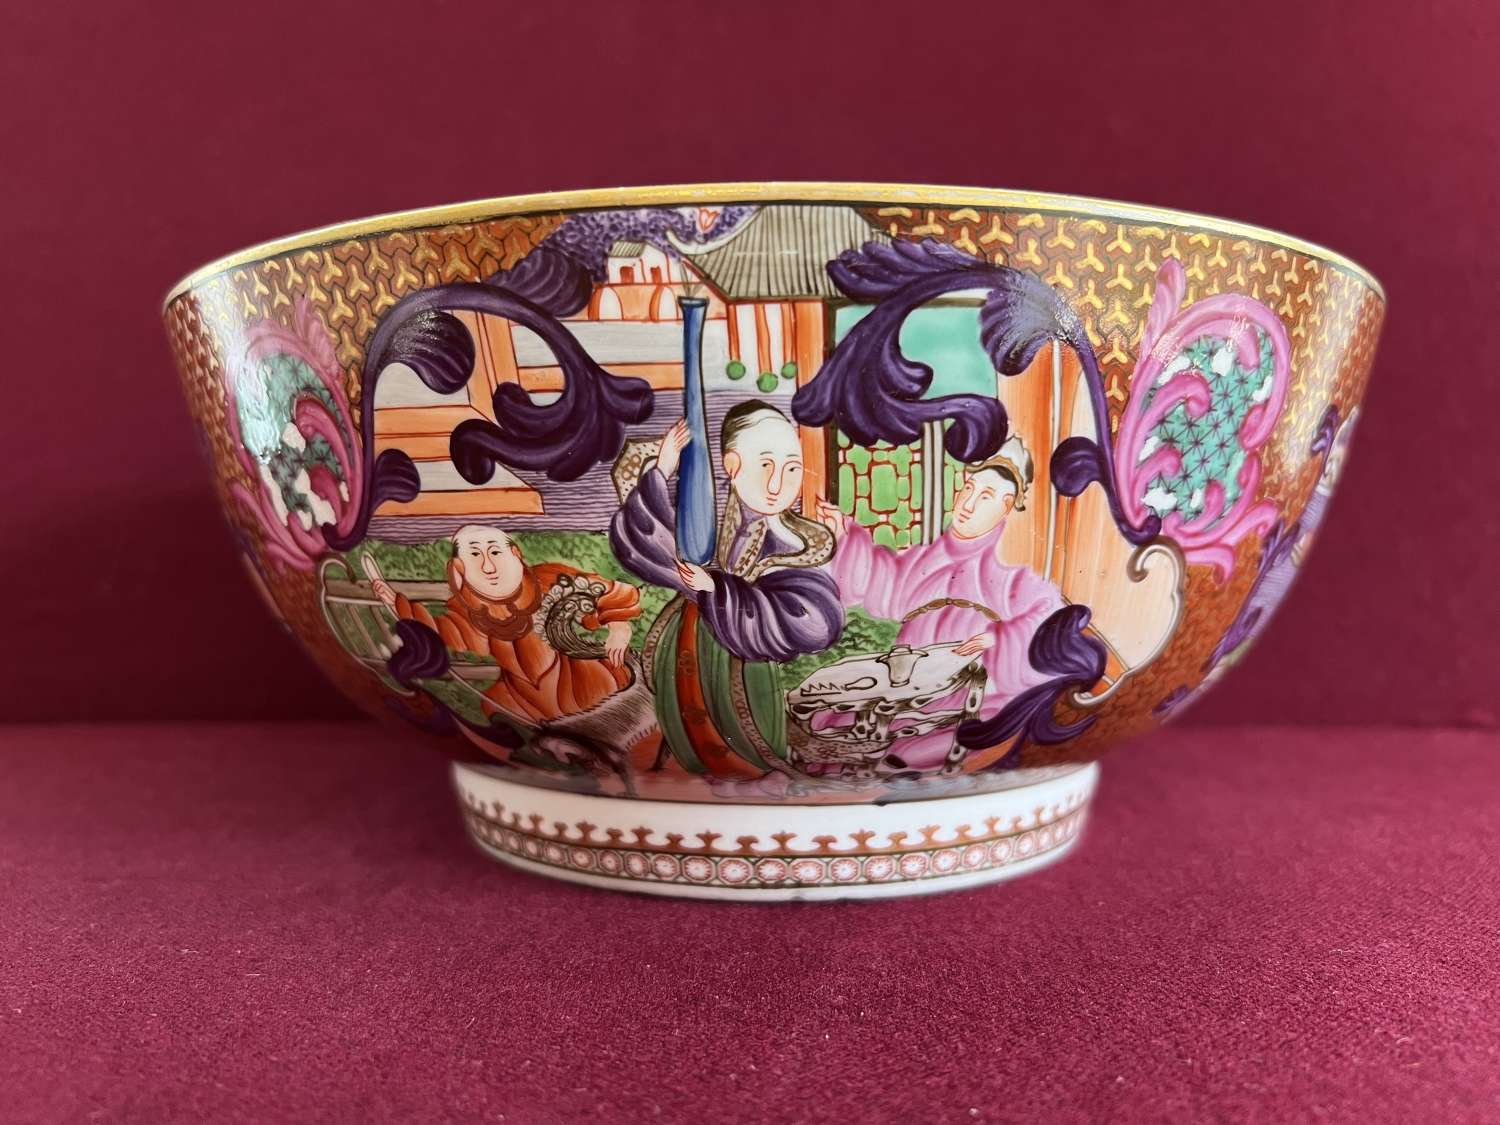 A finely painted English porcelain bowl in the Chinese Mandarin style